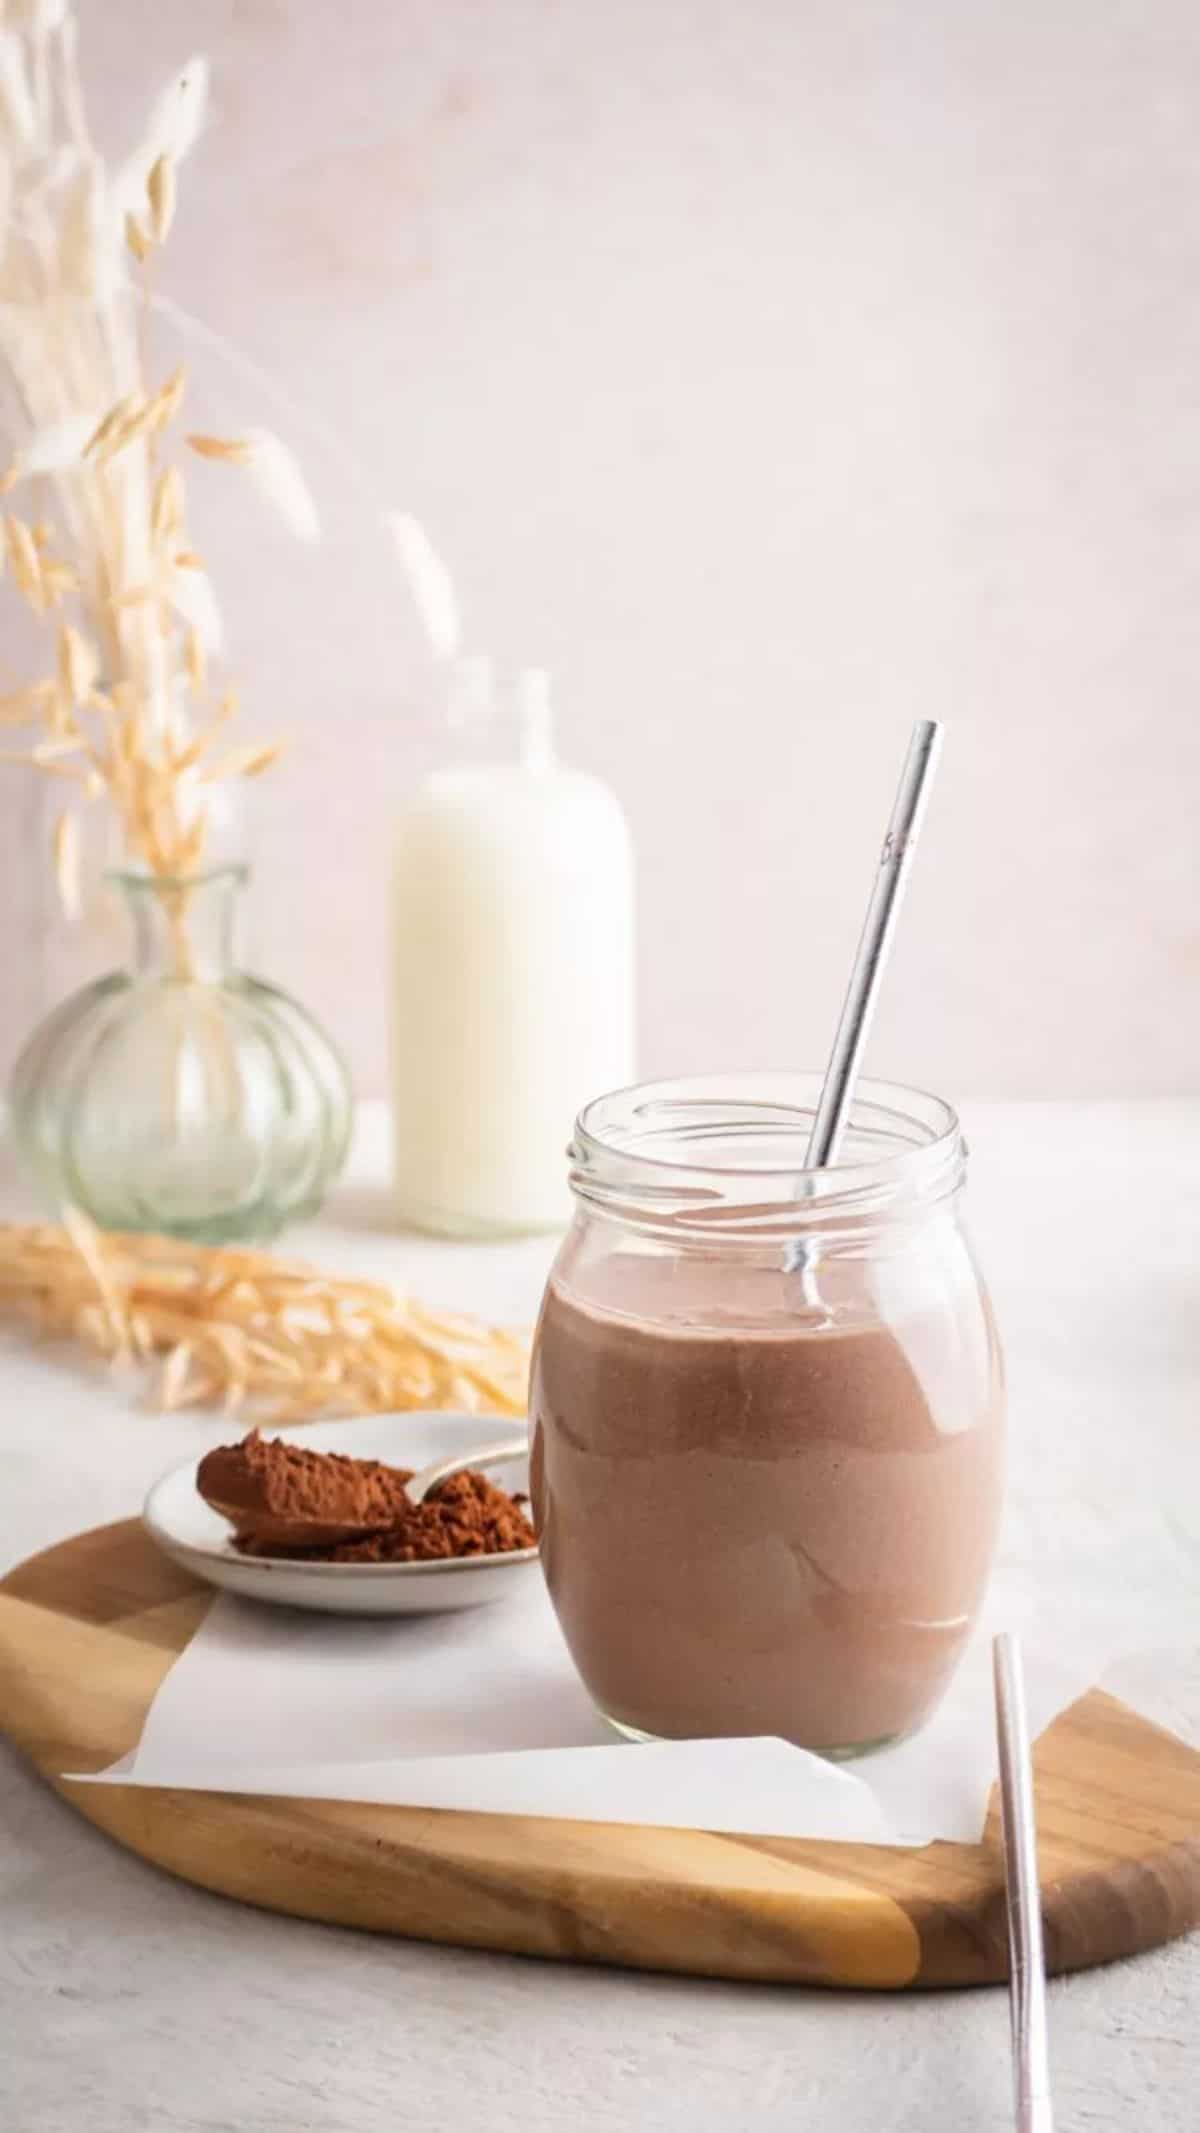 Chocolate Shake in a glass cup with a straw.